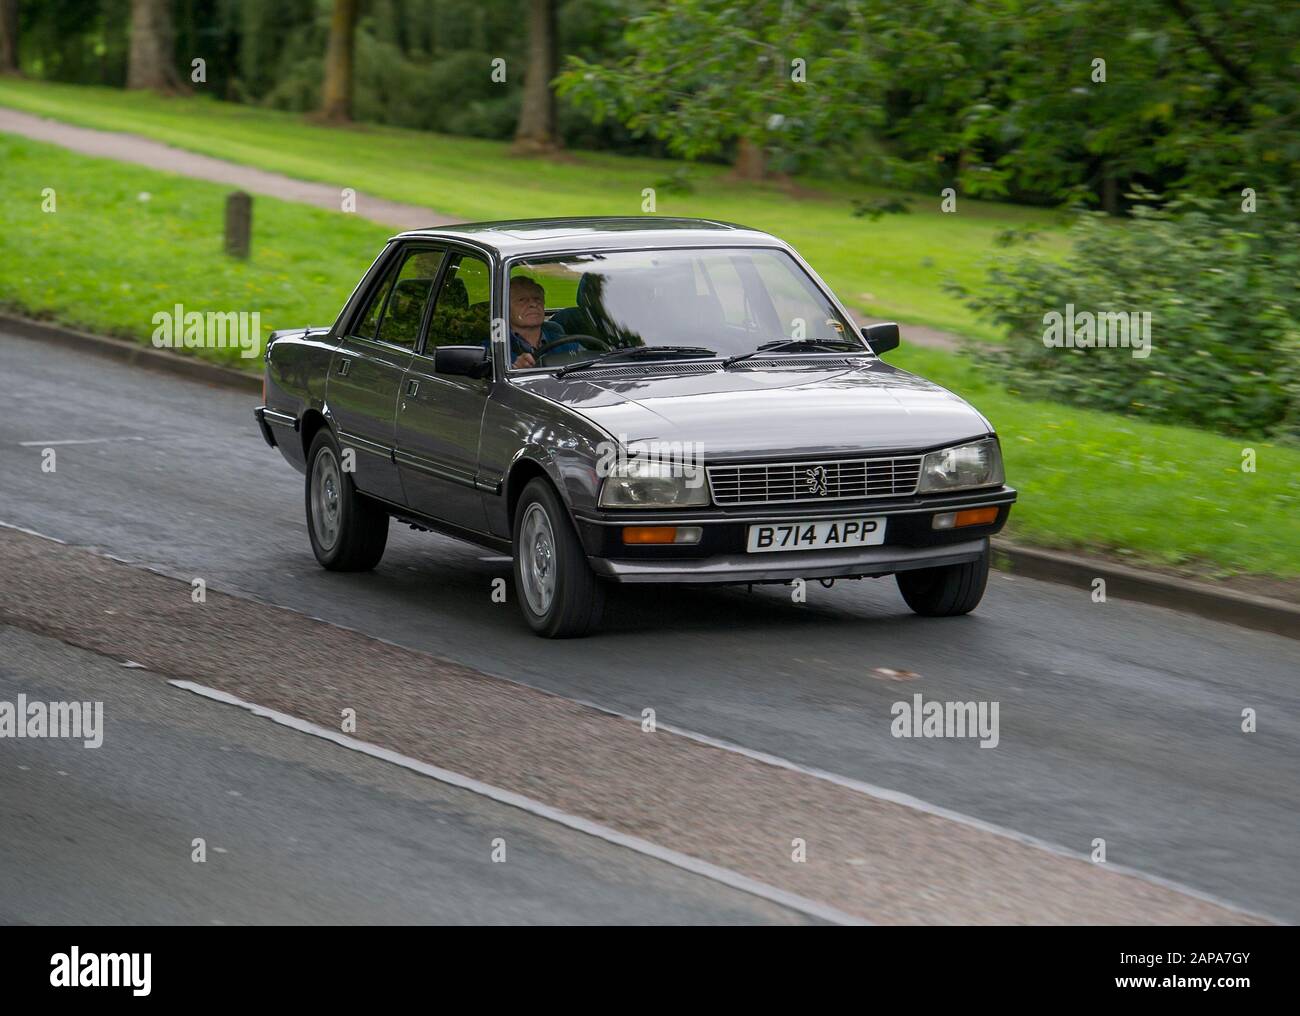 1985 Peugeot 505 GTi classic French fast saloon car Stock Photo